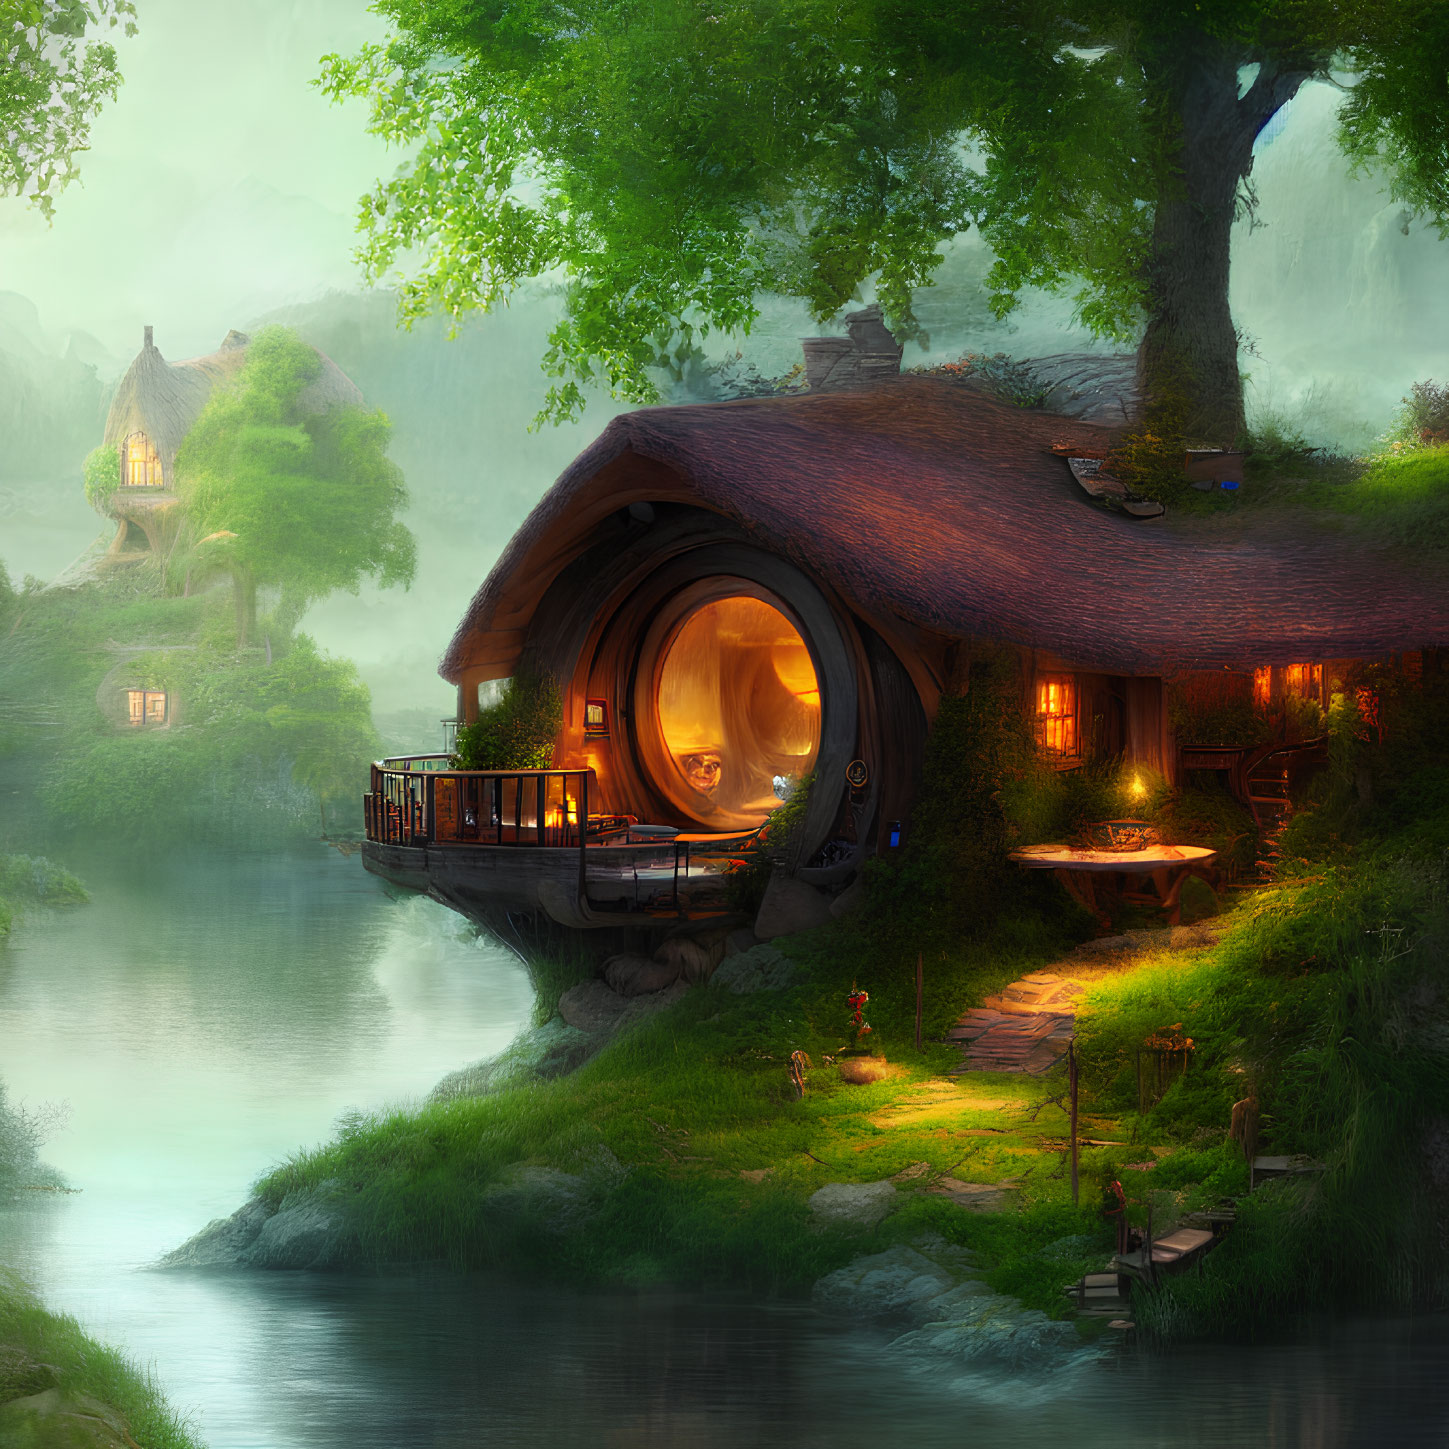 Enchanting riverside cottage with thatched roof and circular door in twilight